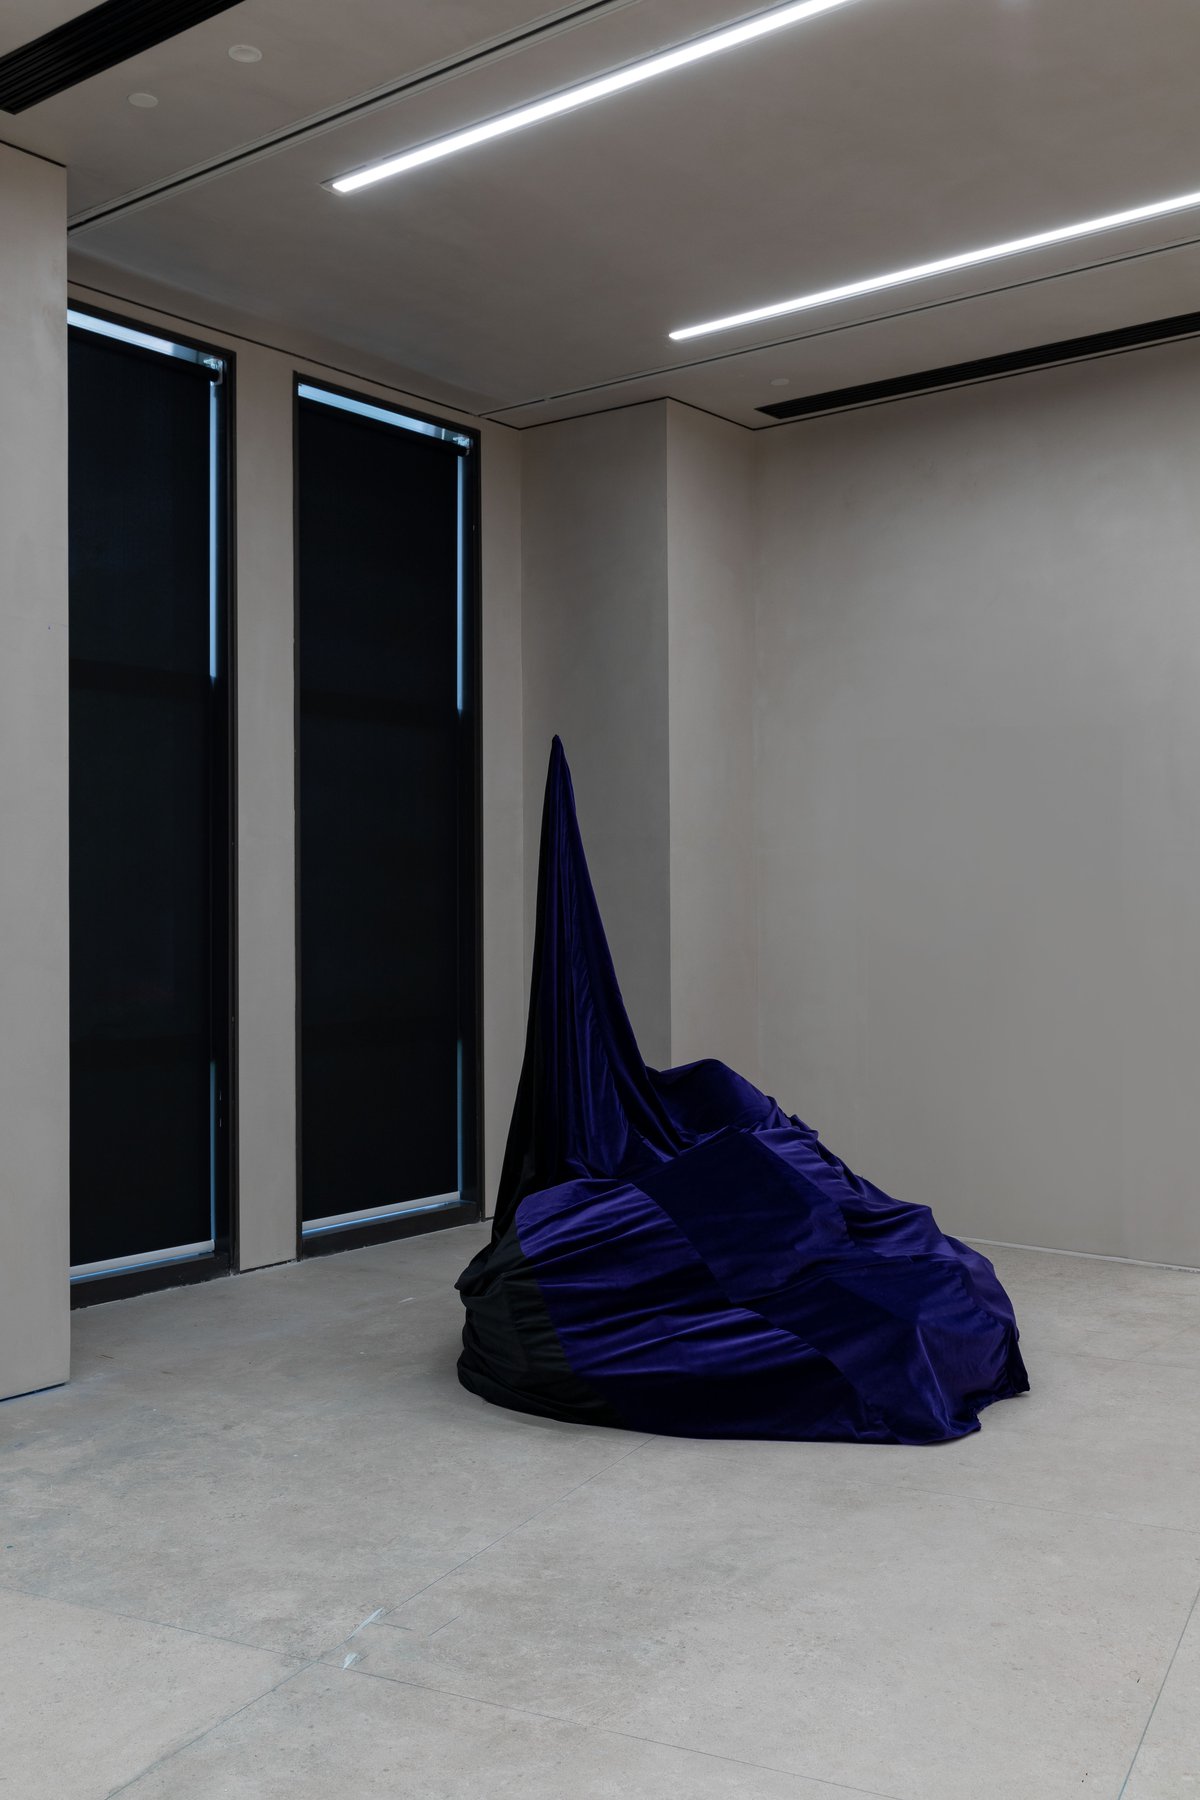 Anna-Sophie BergerCloak, 2021Velvet, tripod and variable hardware220 x 150 x 150 cm (approx. installed dimensions)More Than Human, Blanc Art Space A1, Beijing, 2023.